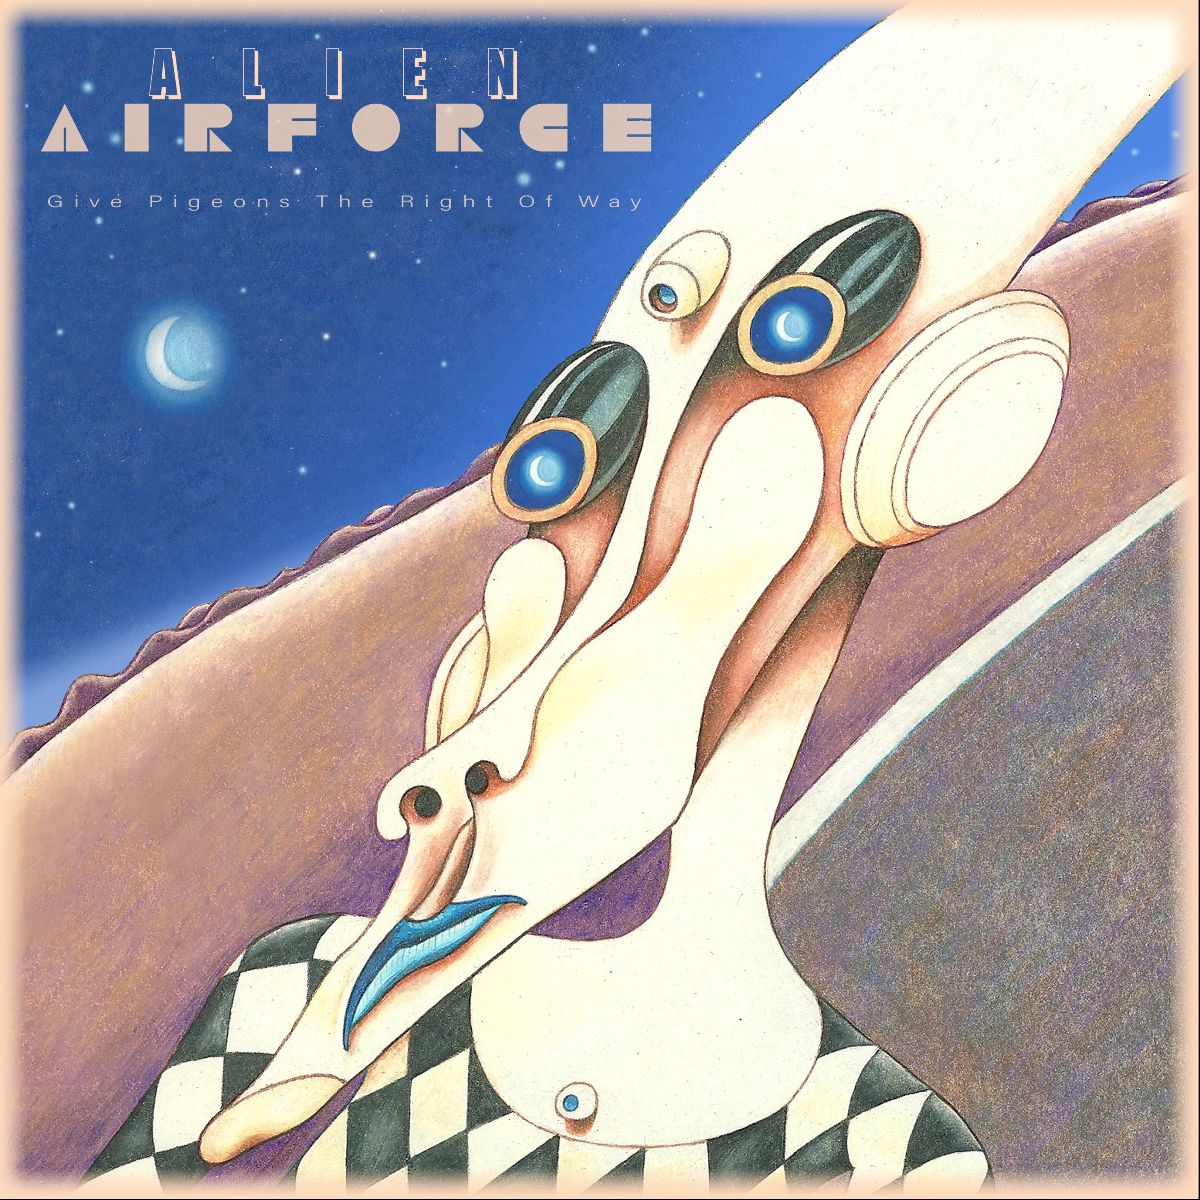 Alien Airforce Release Debut Album 'Give Pigeons The Right Of Way' thepunksite.com/news/alien-air…